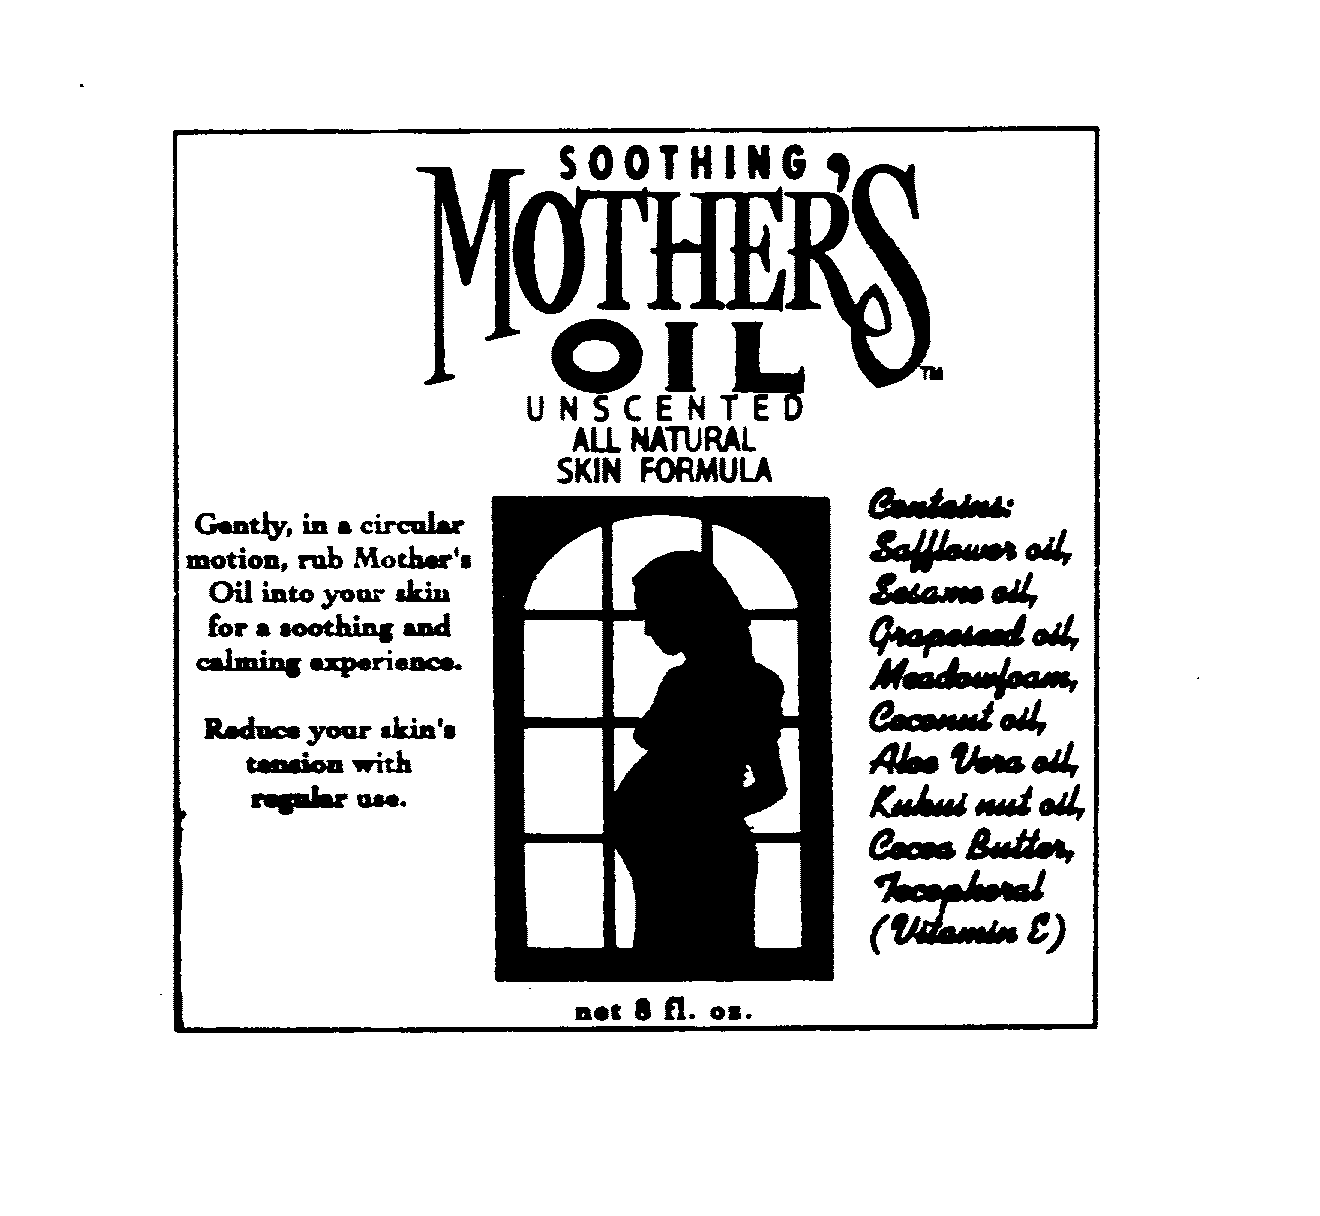 Trademark Logo SOOTHING MOTHER'S OIL (AND OTHER NOTATIONS)